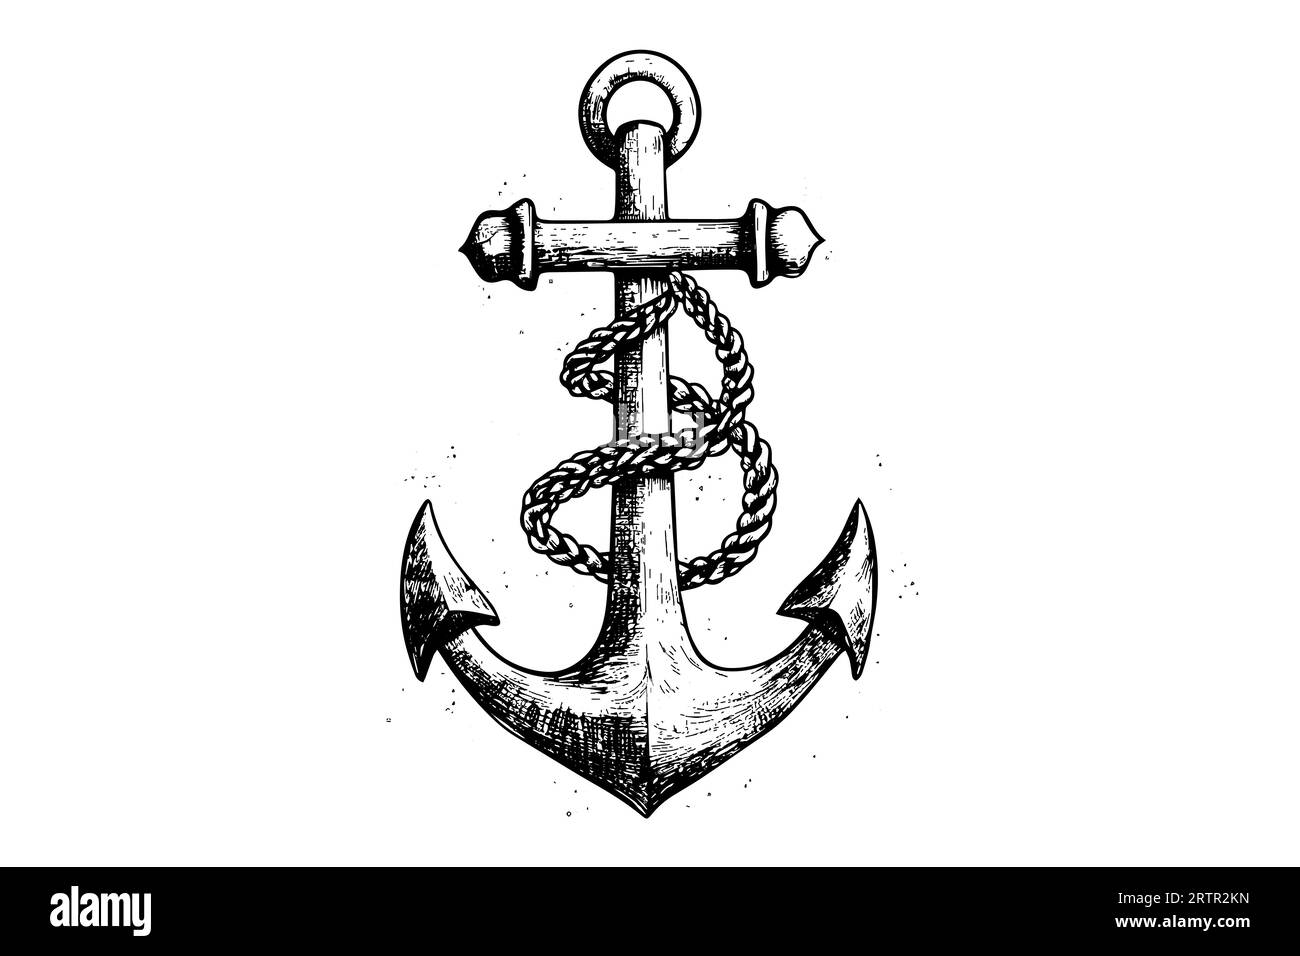 Ship sea anchor and rope in vintage engraving style. Sketch hand drawn vector illustration. Stock Vector